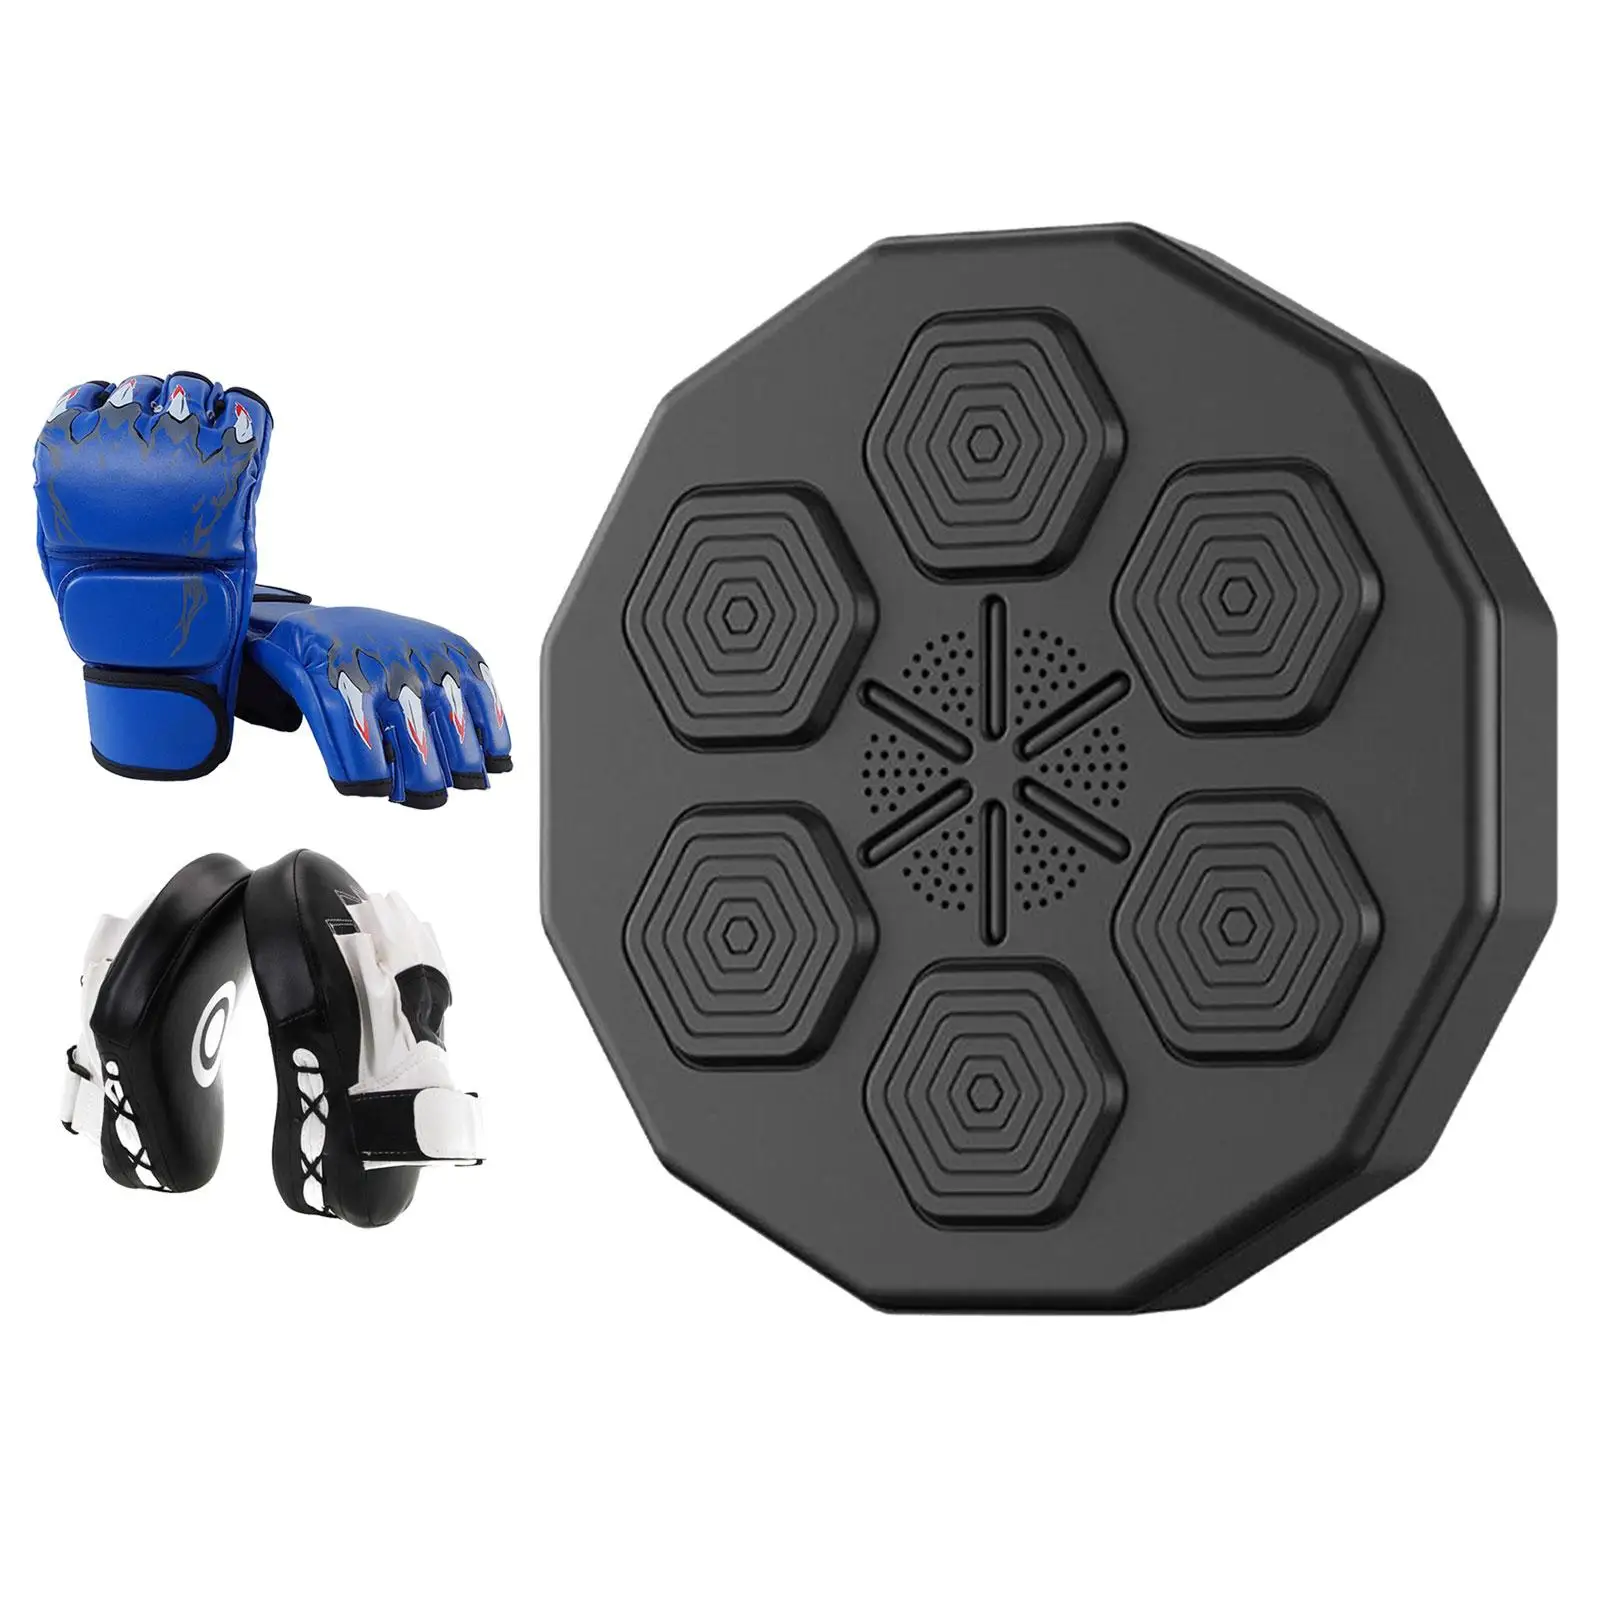 Music Boxing Machine Equipment light Reaction with Gloves Rhythm Wall Target for Karate Home Strength Practice Indoor